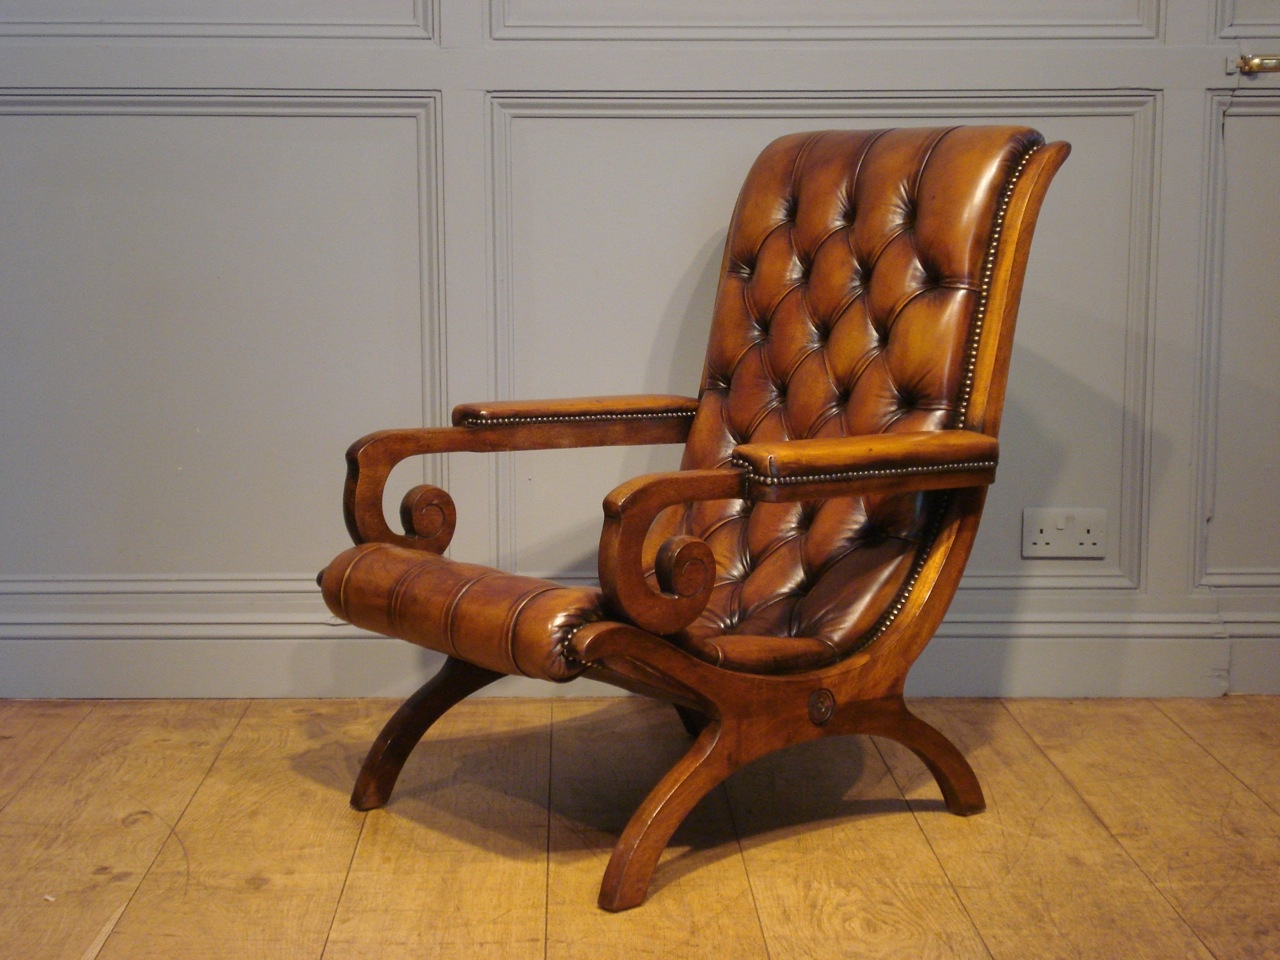 Antique leather chairs